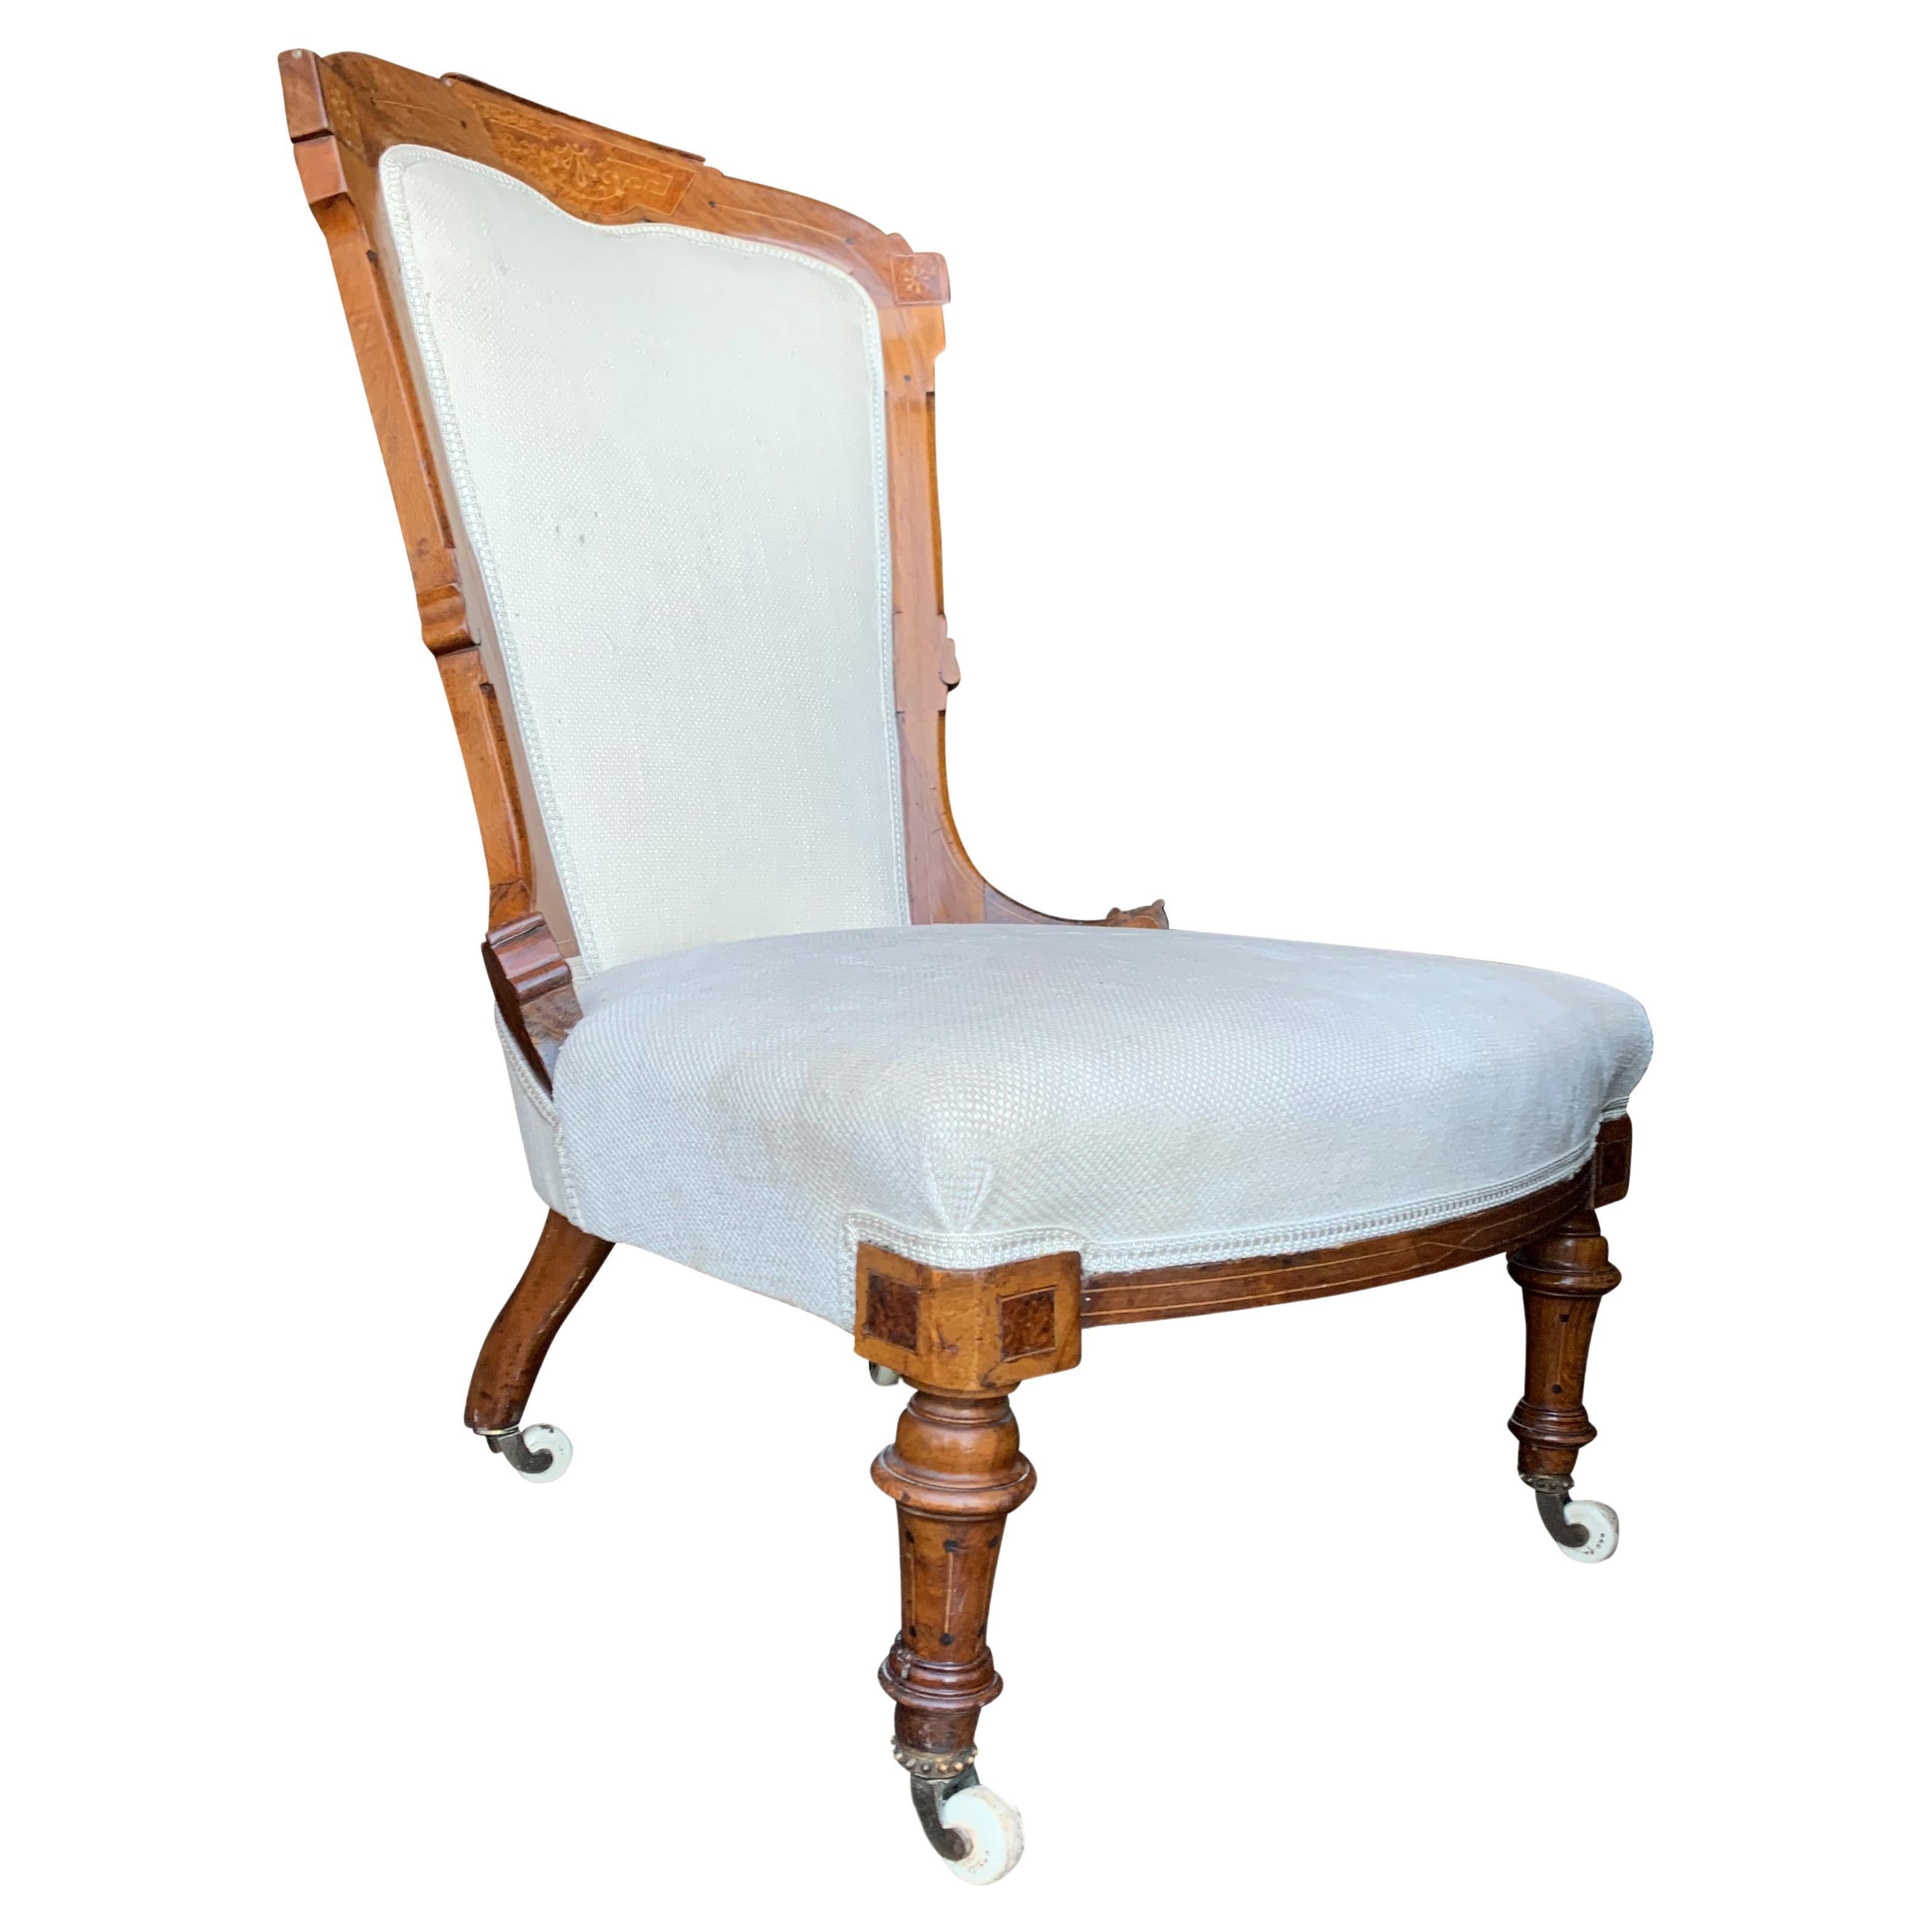 An Empire Walnut Upholstered Salon Chair With Decorative Inlay & Ceramic Castors For Sale